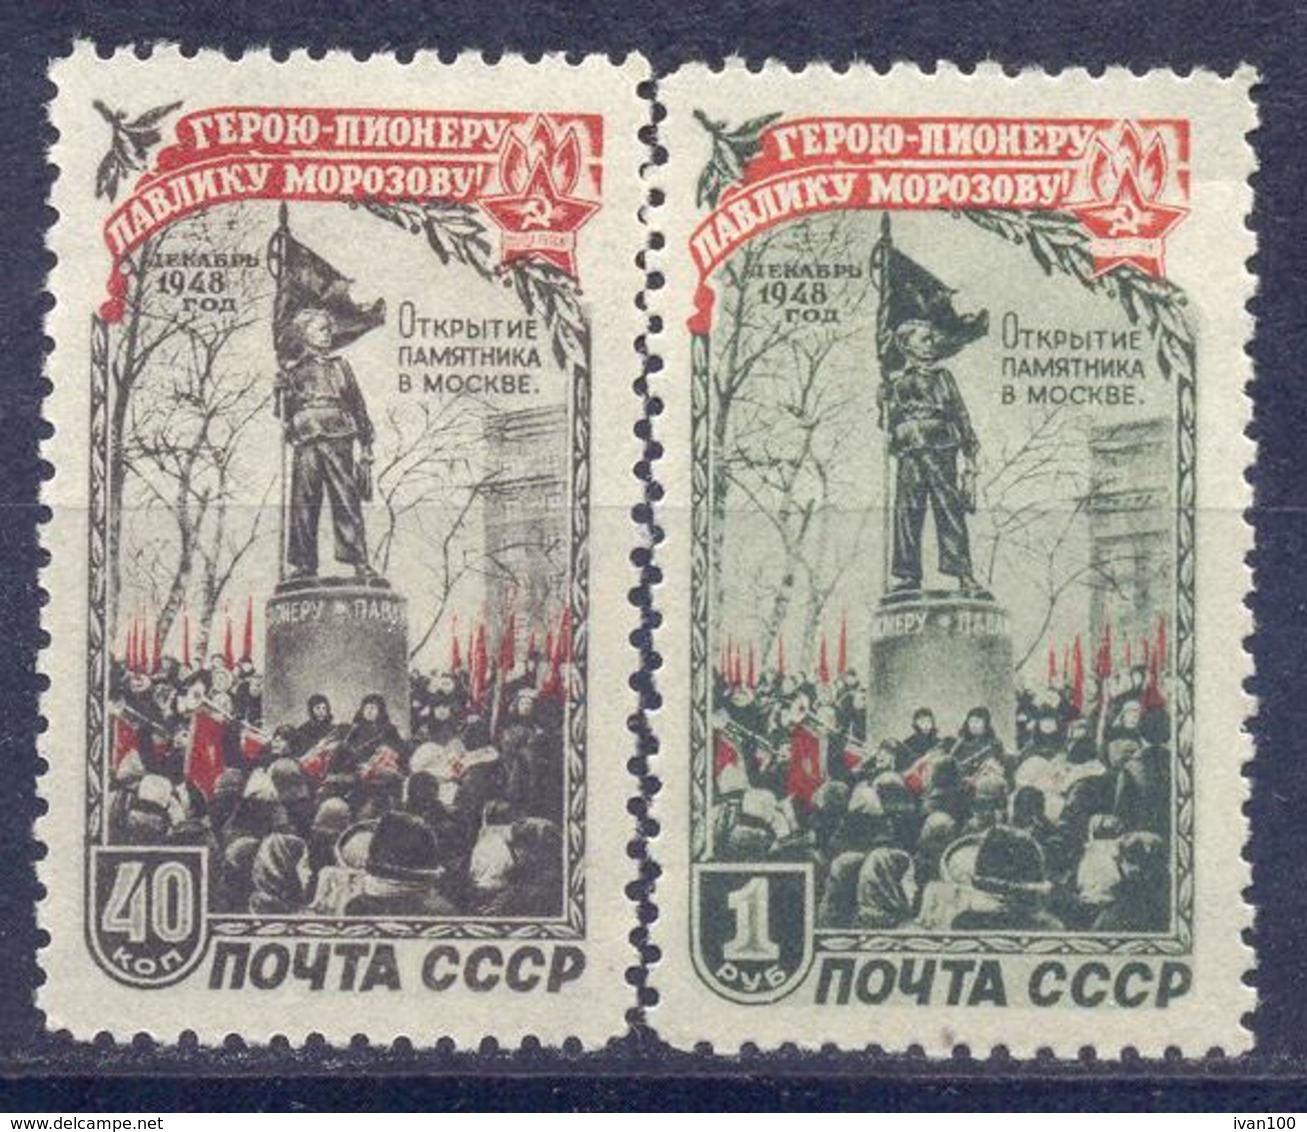 1950. USSR/Russia, Unveiling Of Monument To Pavlik Morosov, Mich.1448/49, 2v, Mint/* - Neufs